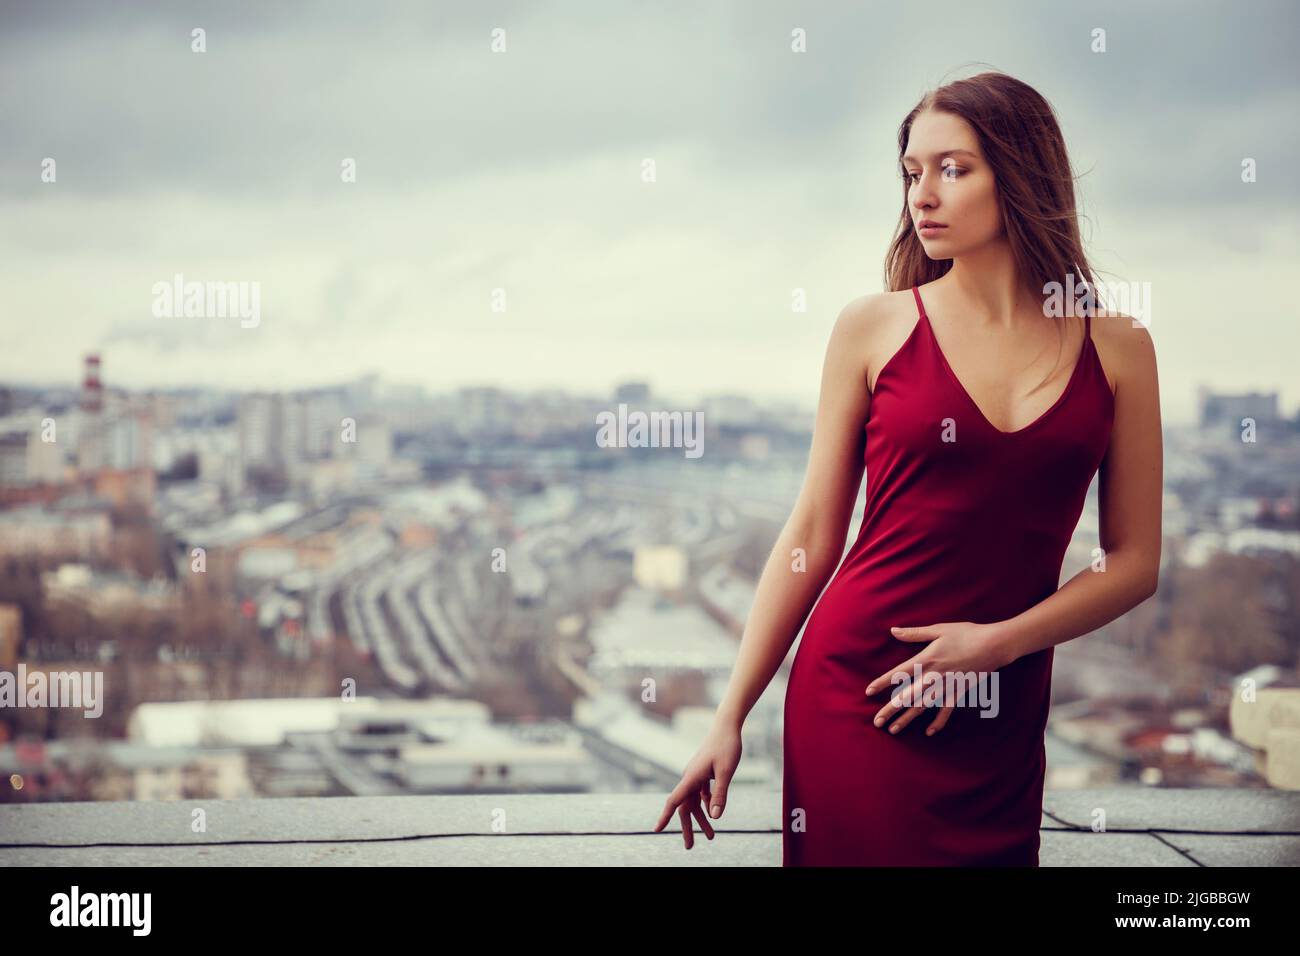 Slim girl in red dress is standing on top of skyscraper, high above the megacity, sprawling behind her till the horizon. Stock Photo